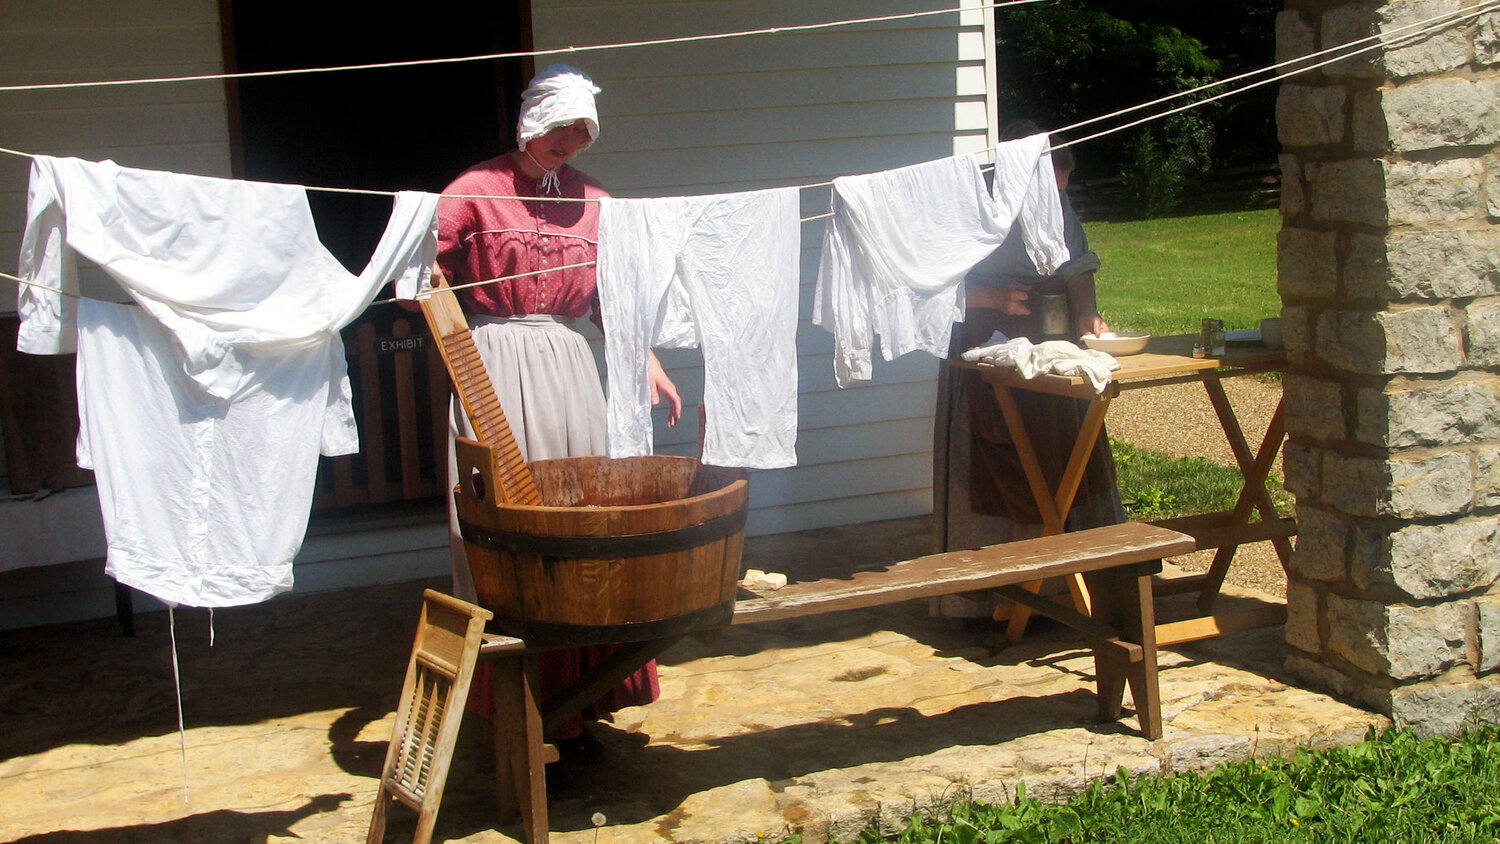 A volunteer dressed as a laundress leads a demonstration for visitors at the Fort Scott National Historic Site.